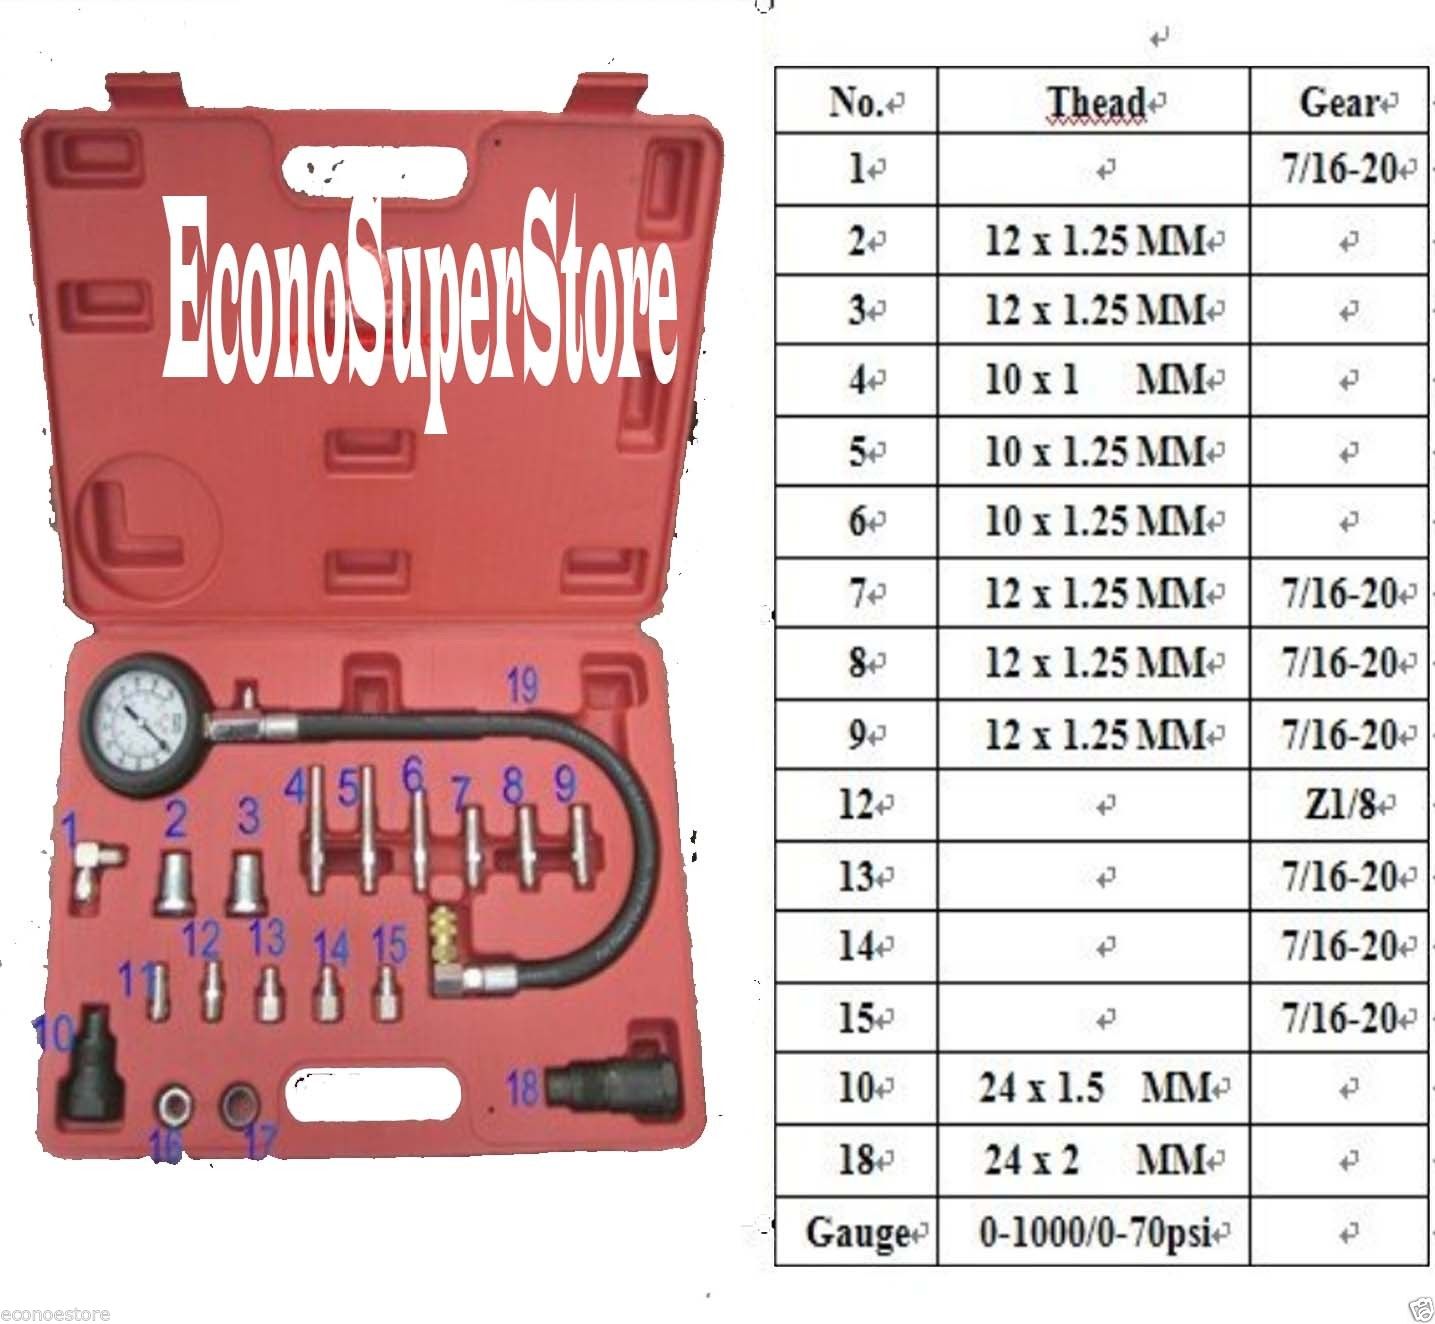 Details about   All in 1 Diesel Engine Compression Tester Gauge for Car Tractor Trucks 0-1000PSI 